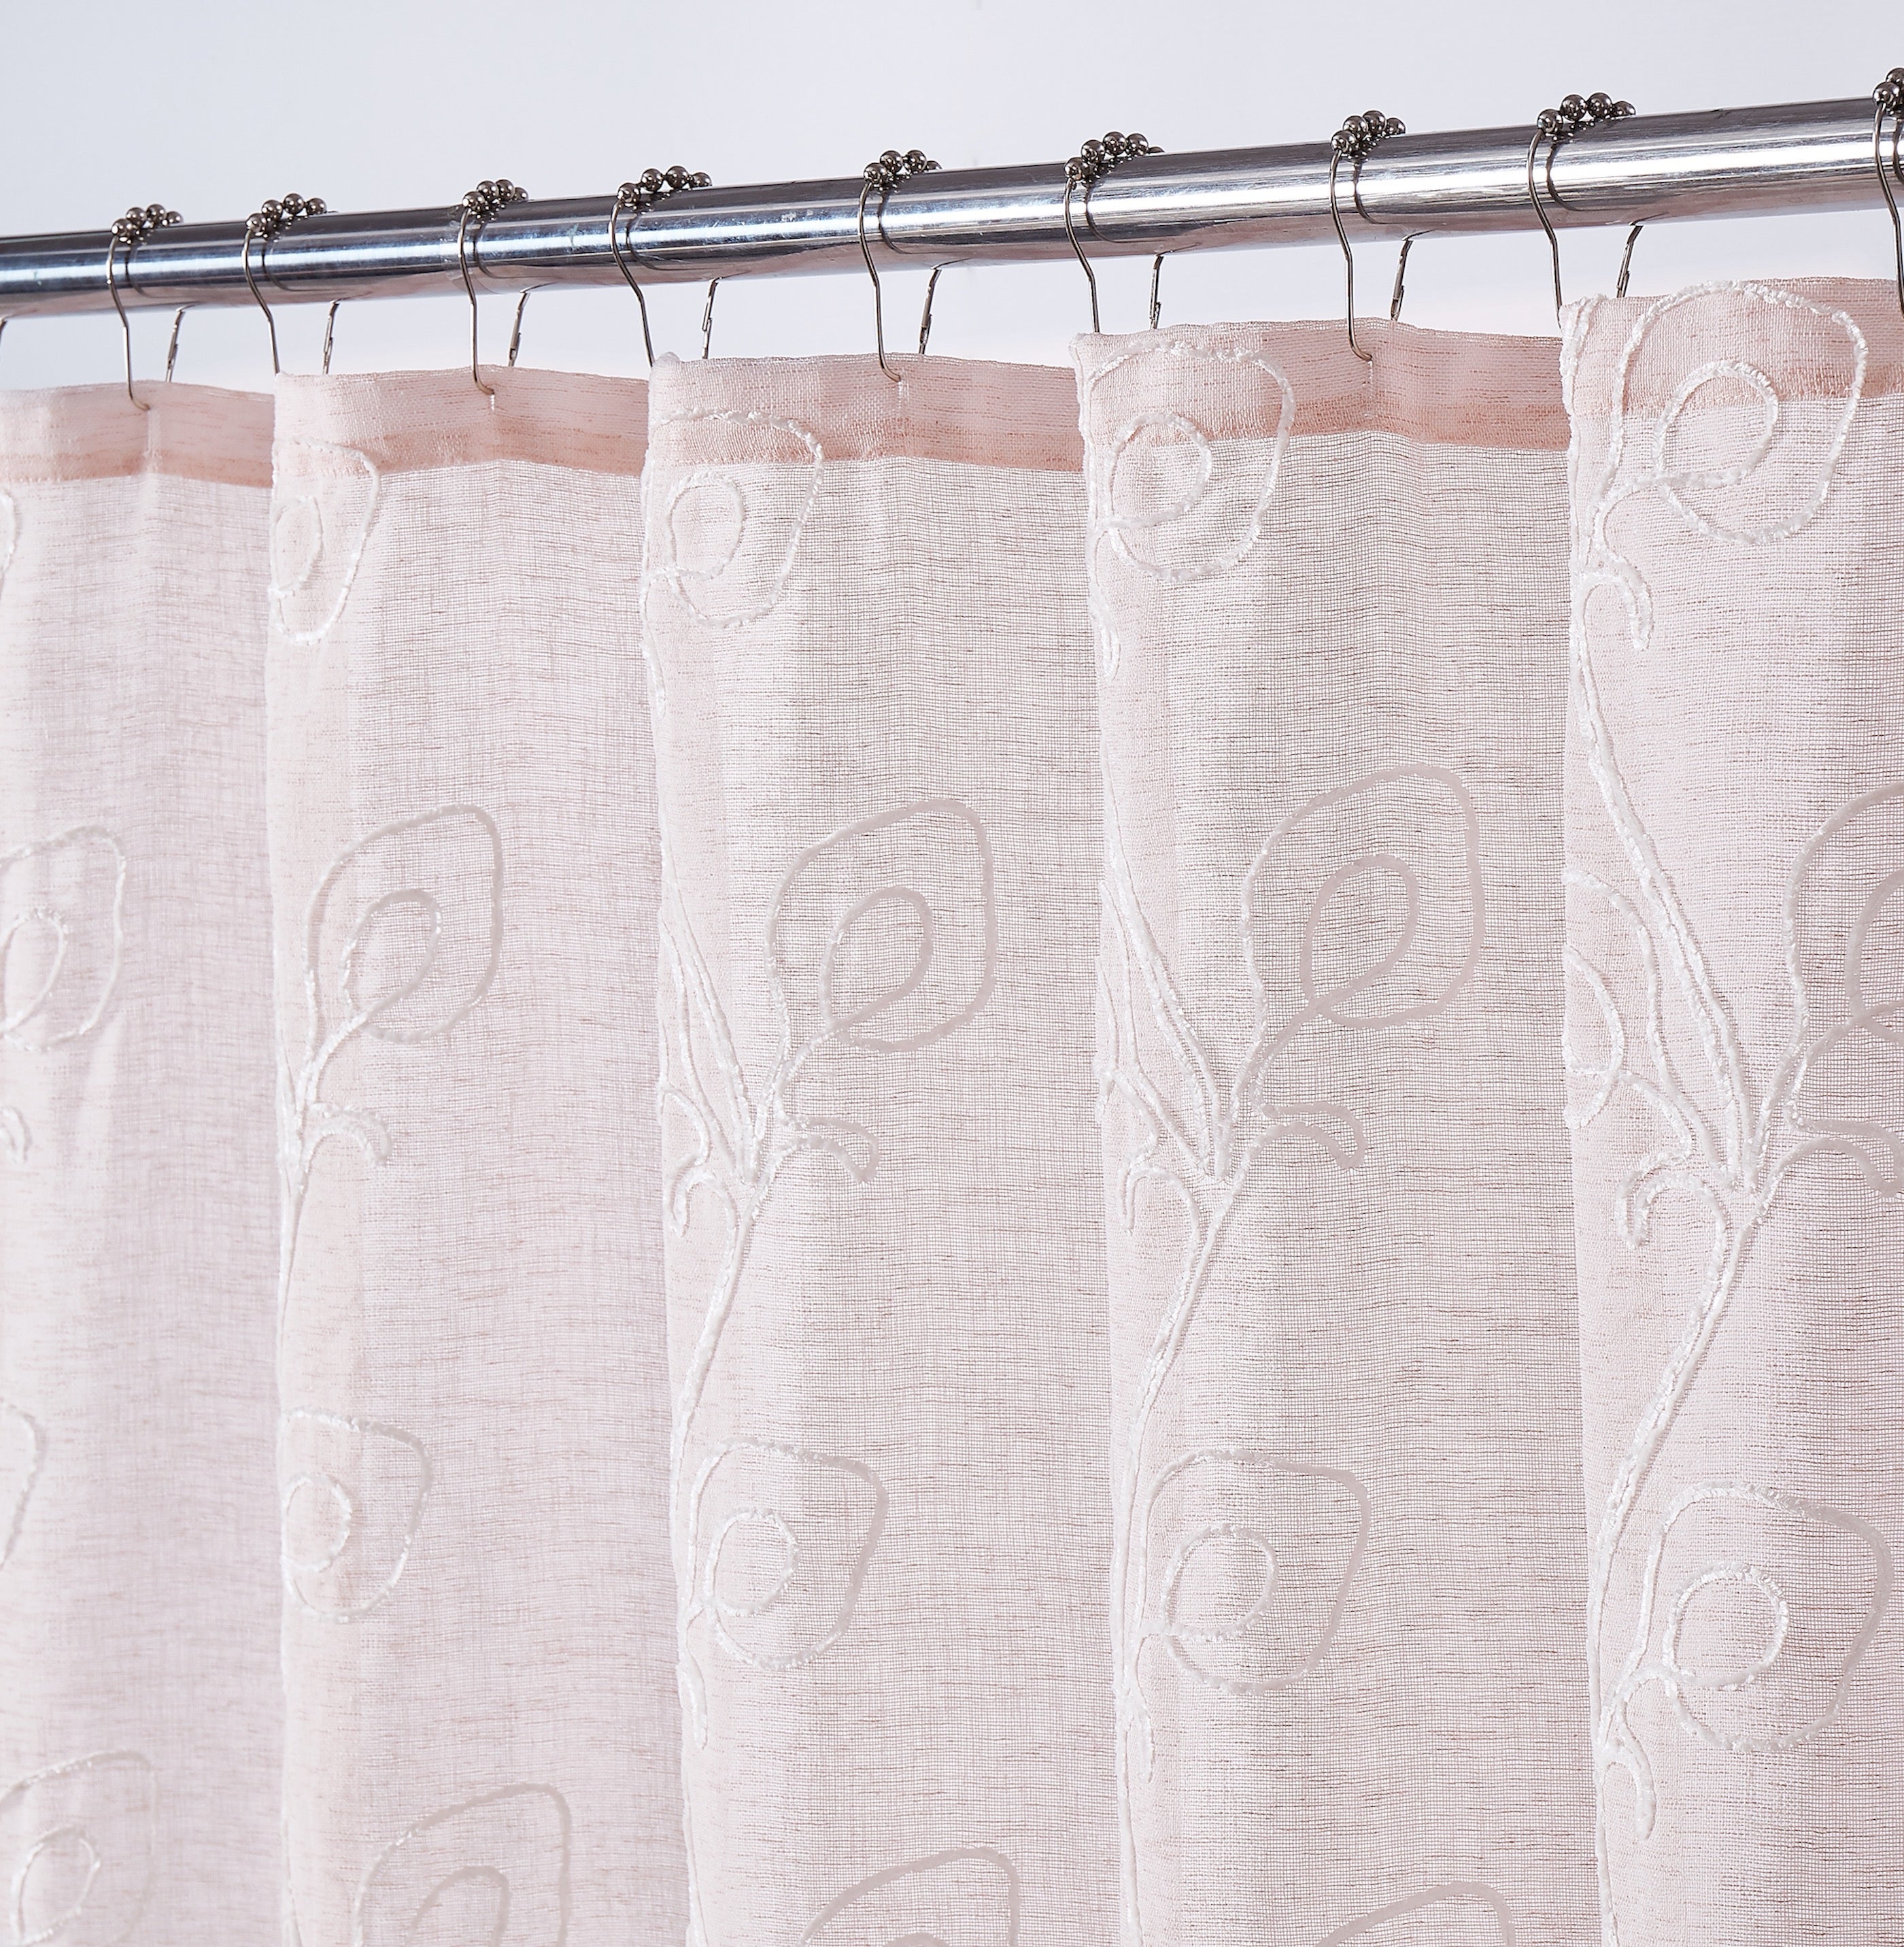 Dainty Home Stella 3D Linen Look Textured Floral 3D Chenille Designed Fabric Shower Curtain